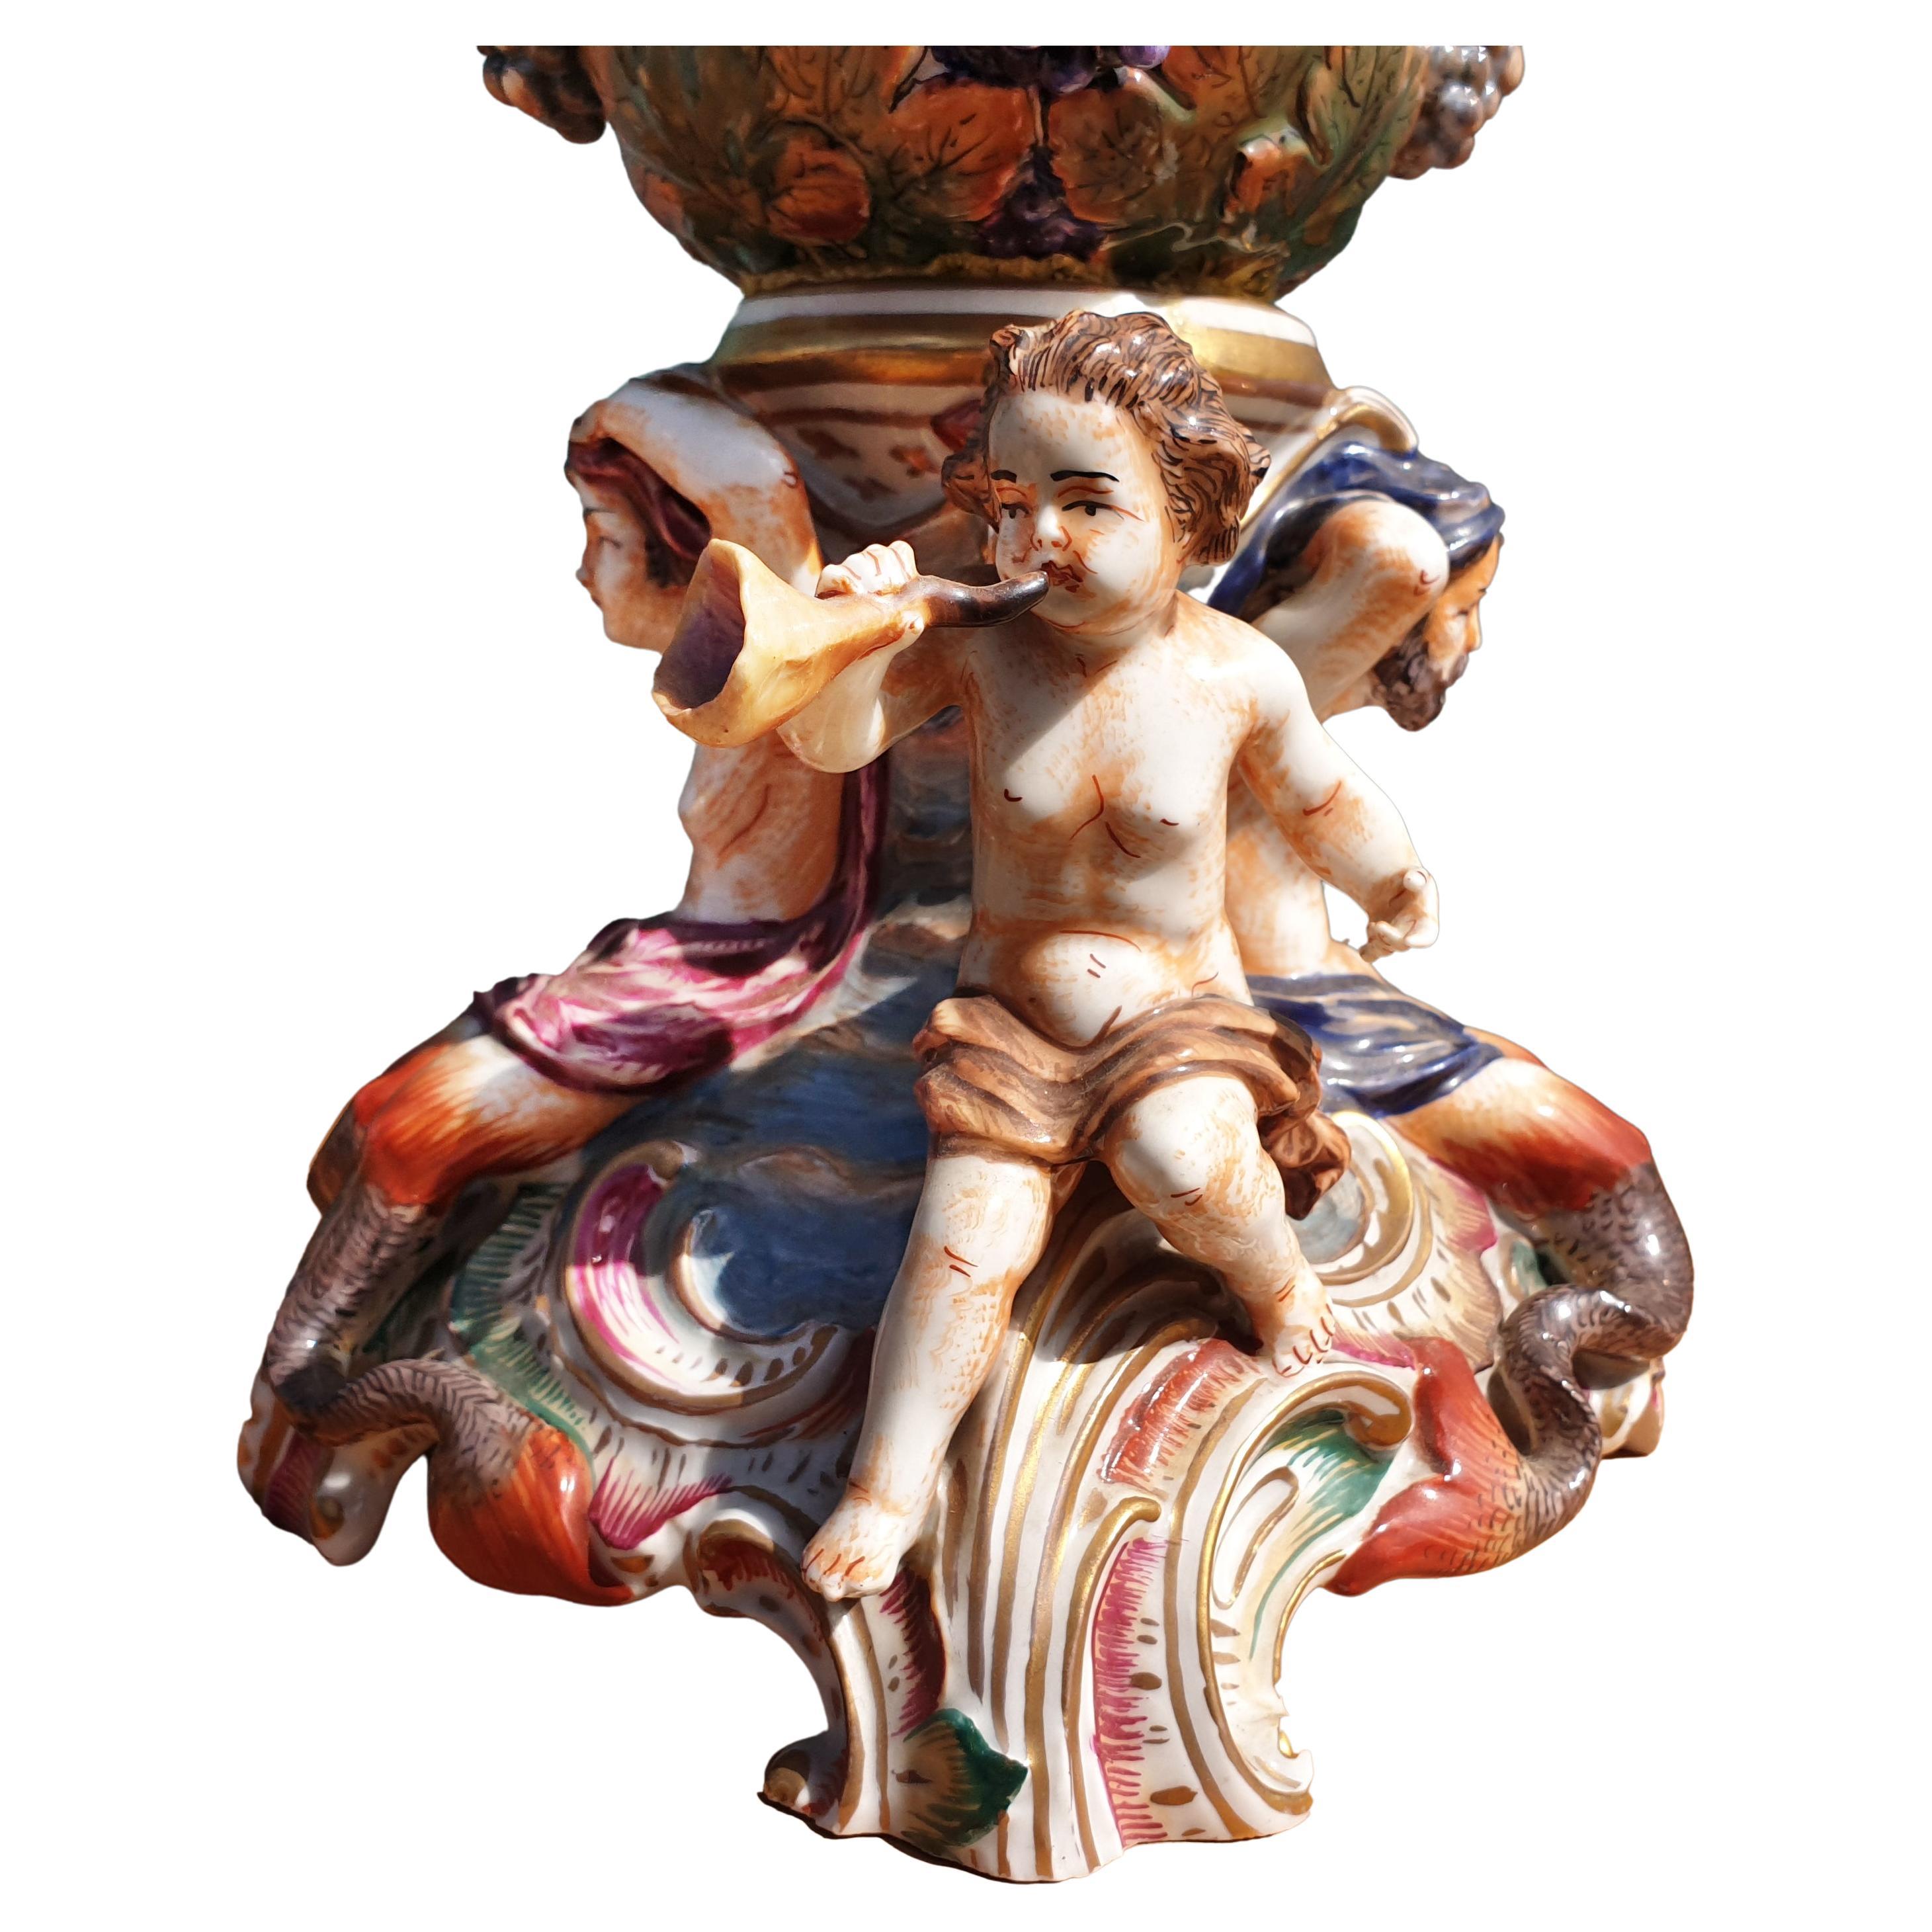 An impressive Capodimonte vase depicting figures, flowers and leaves in finest relief work. The hand crafted vase is hand painted in vivid colors and is partly gilded. The vase is adorned with two figural handles in the form of scantily clad young